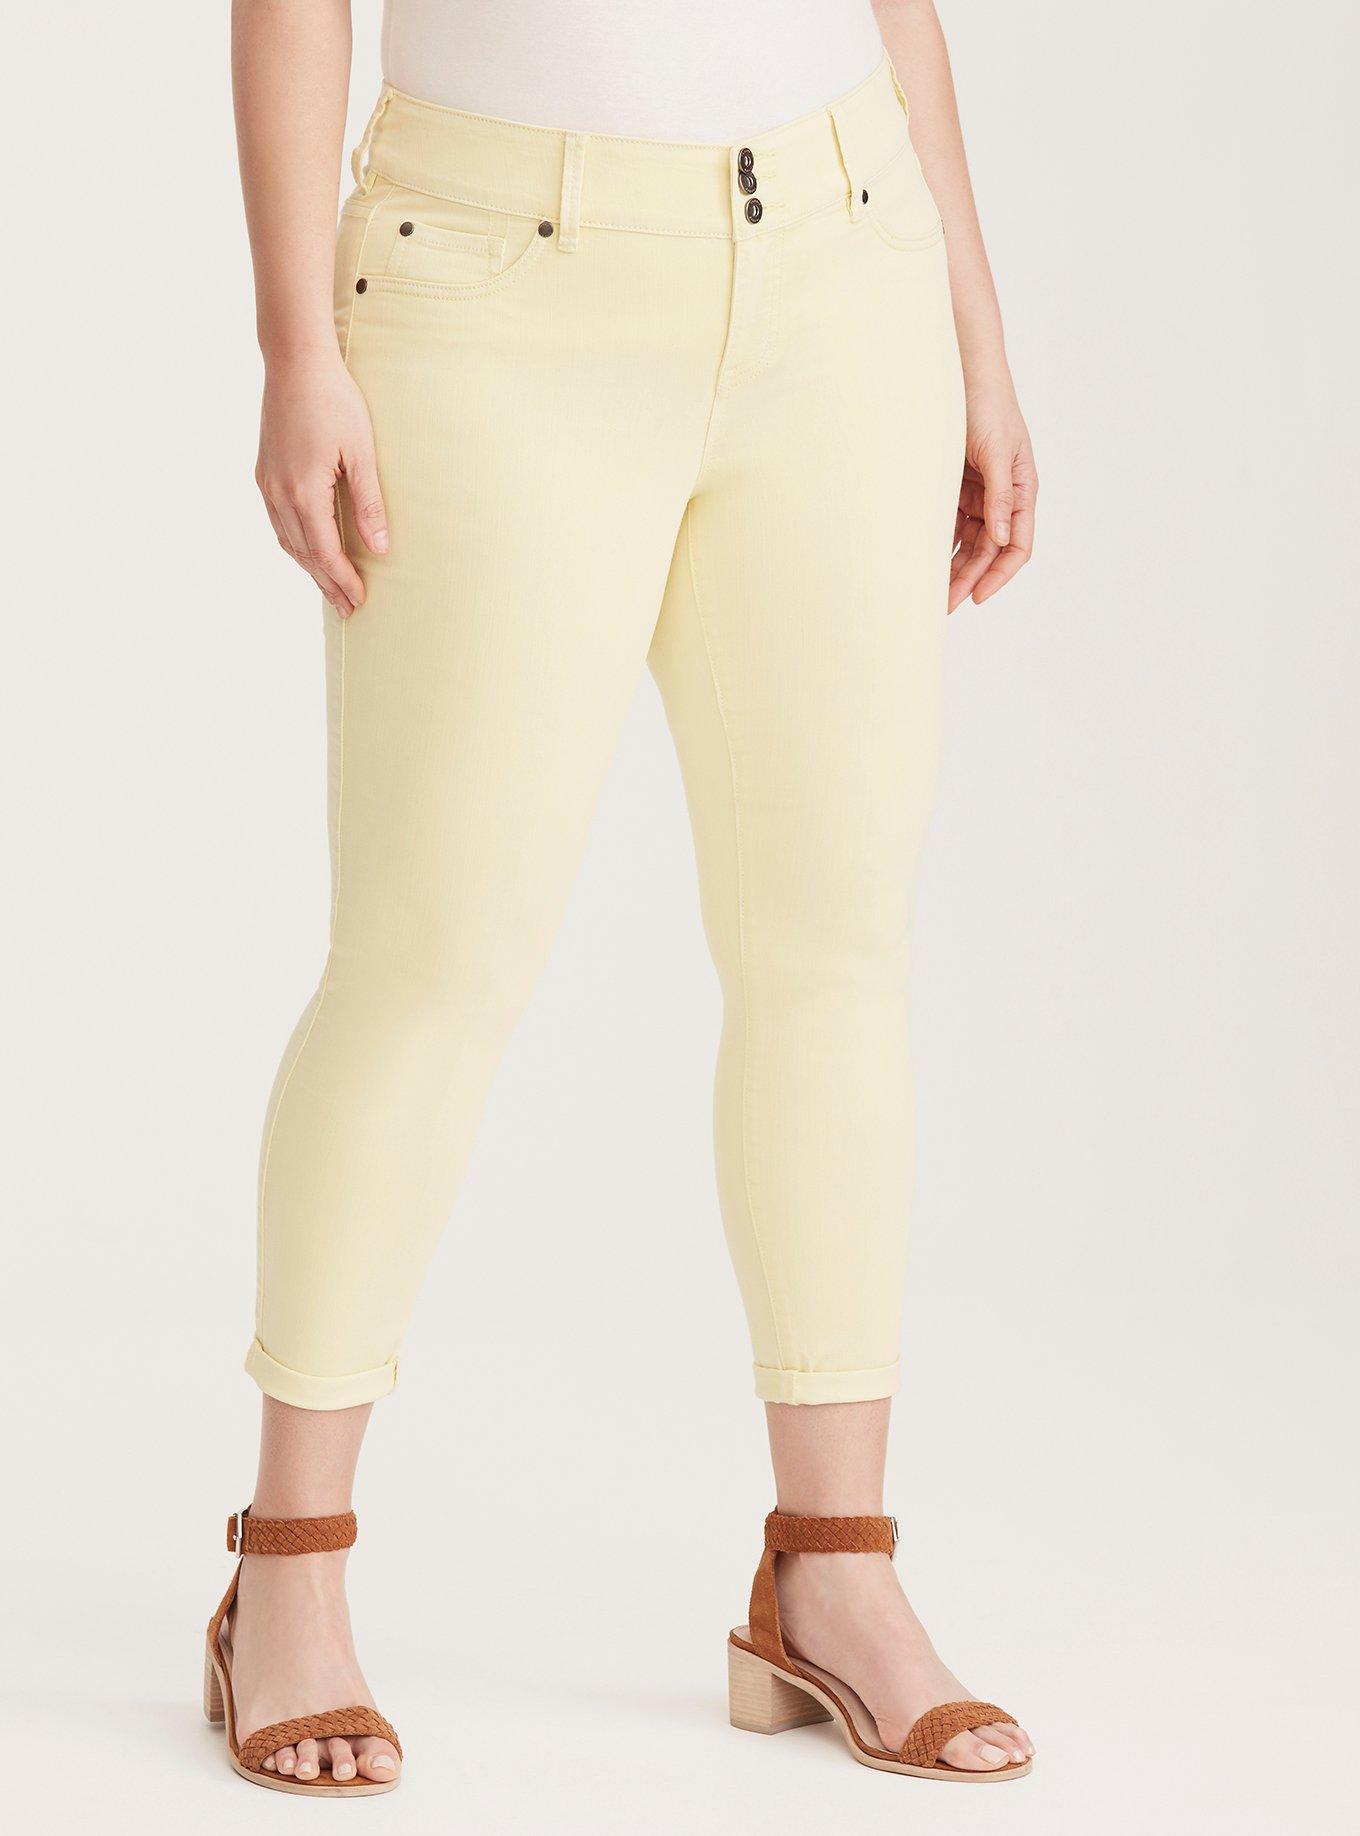 Plus Size - Torrid Cropped Jeggings - Faded Yellow Wash - Torrid